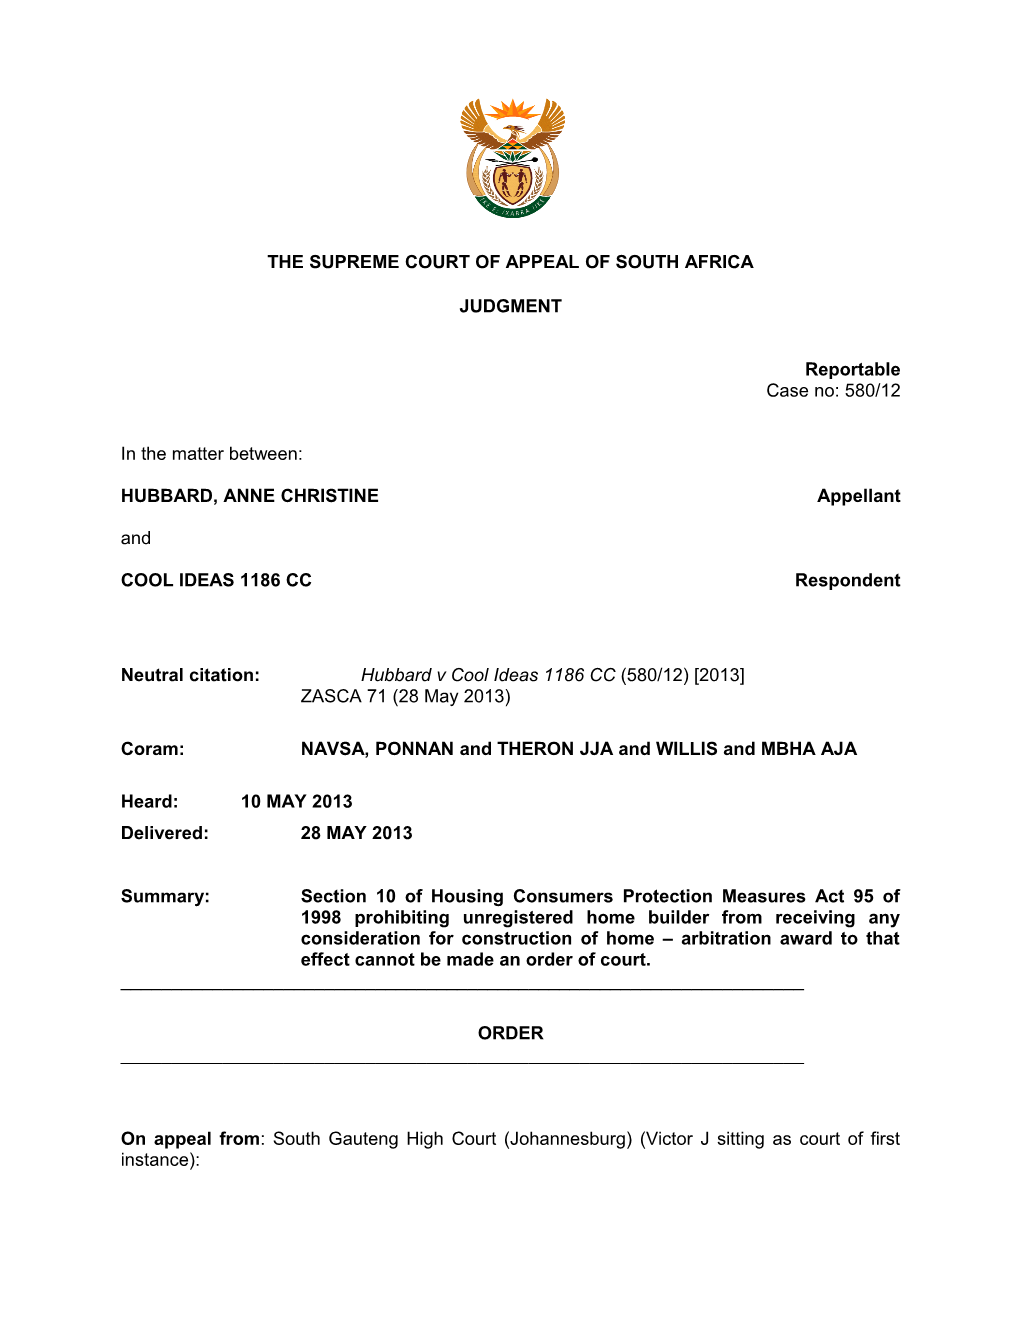 The Supreme Court of Appeal of South Africa s4